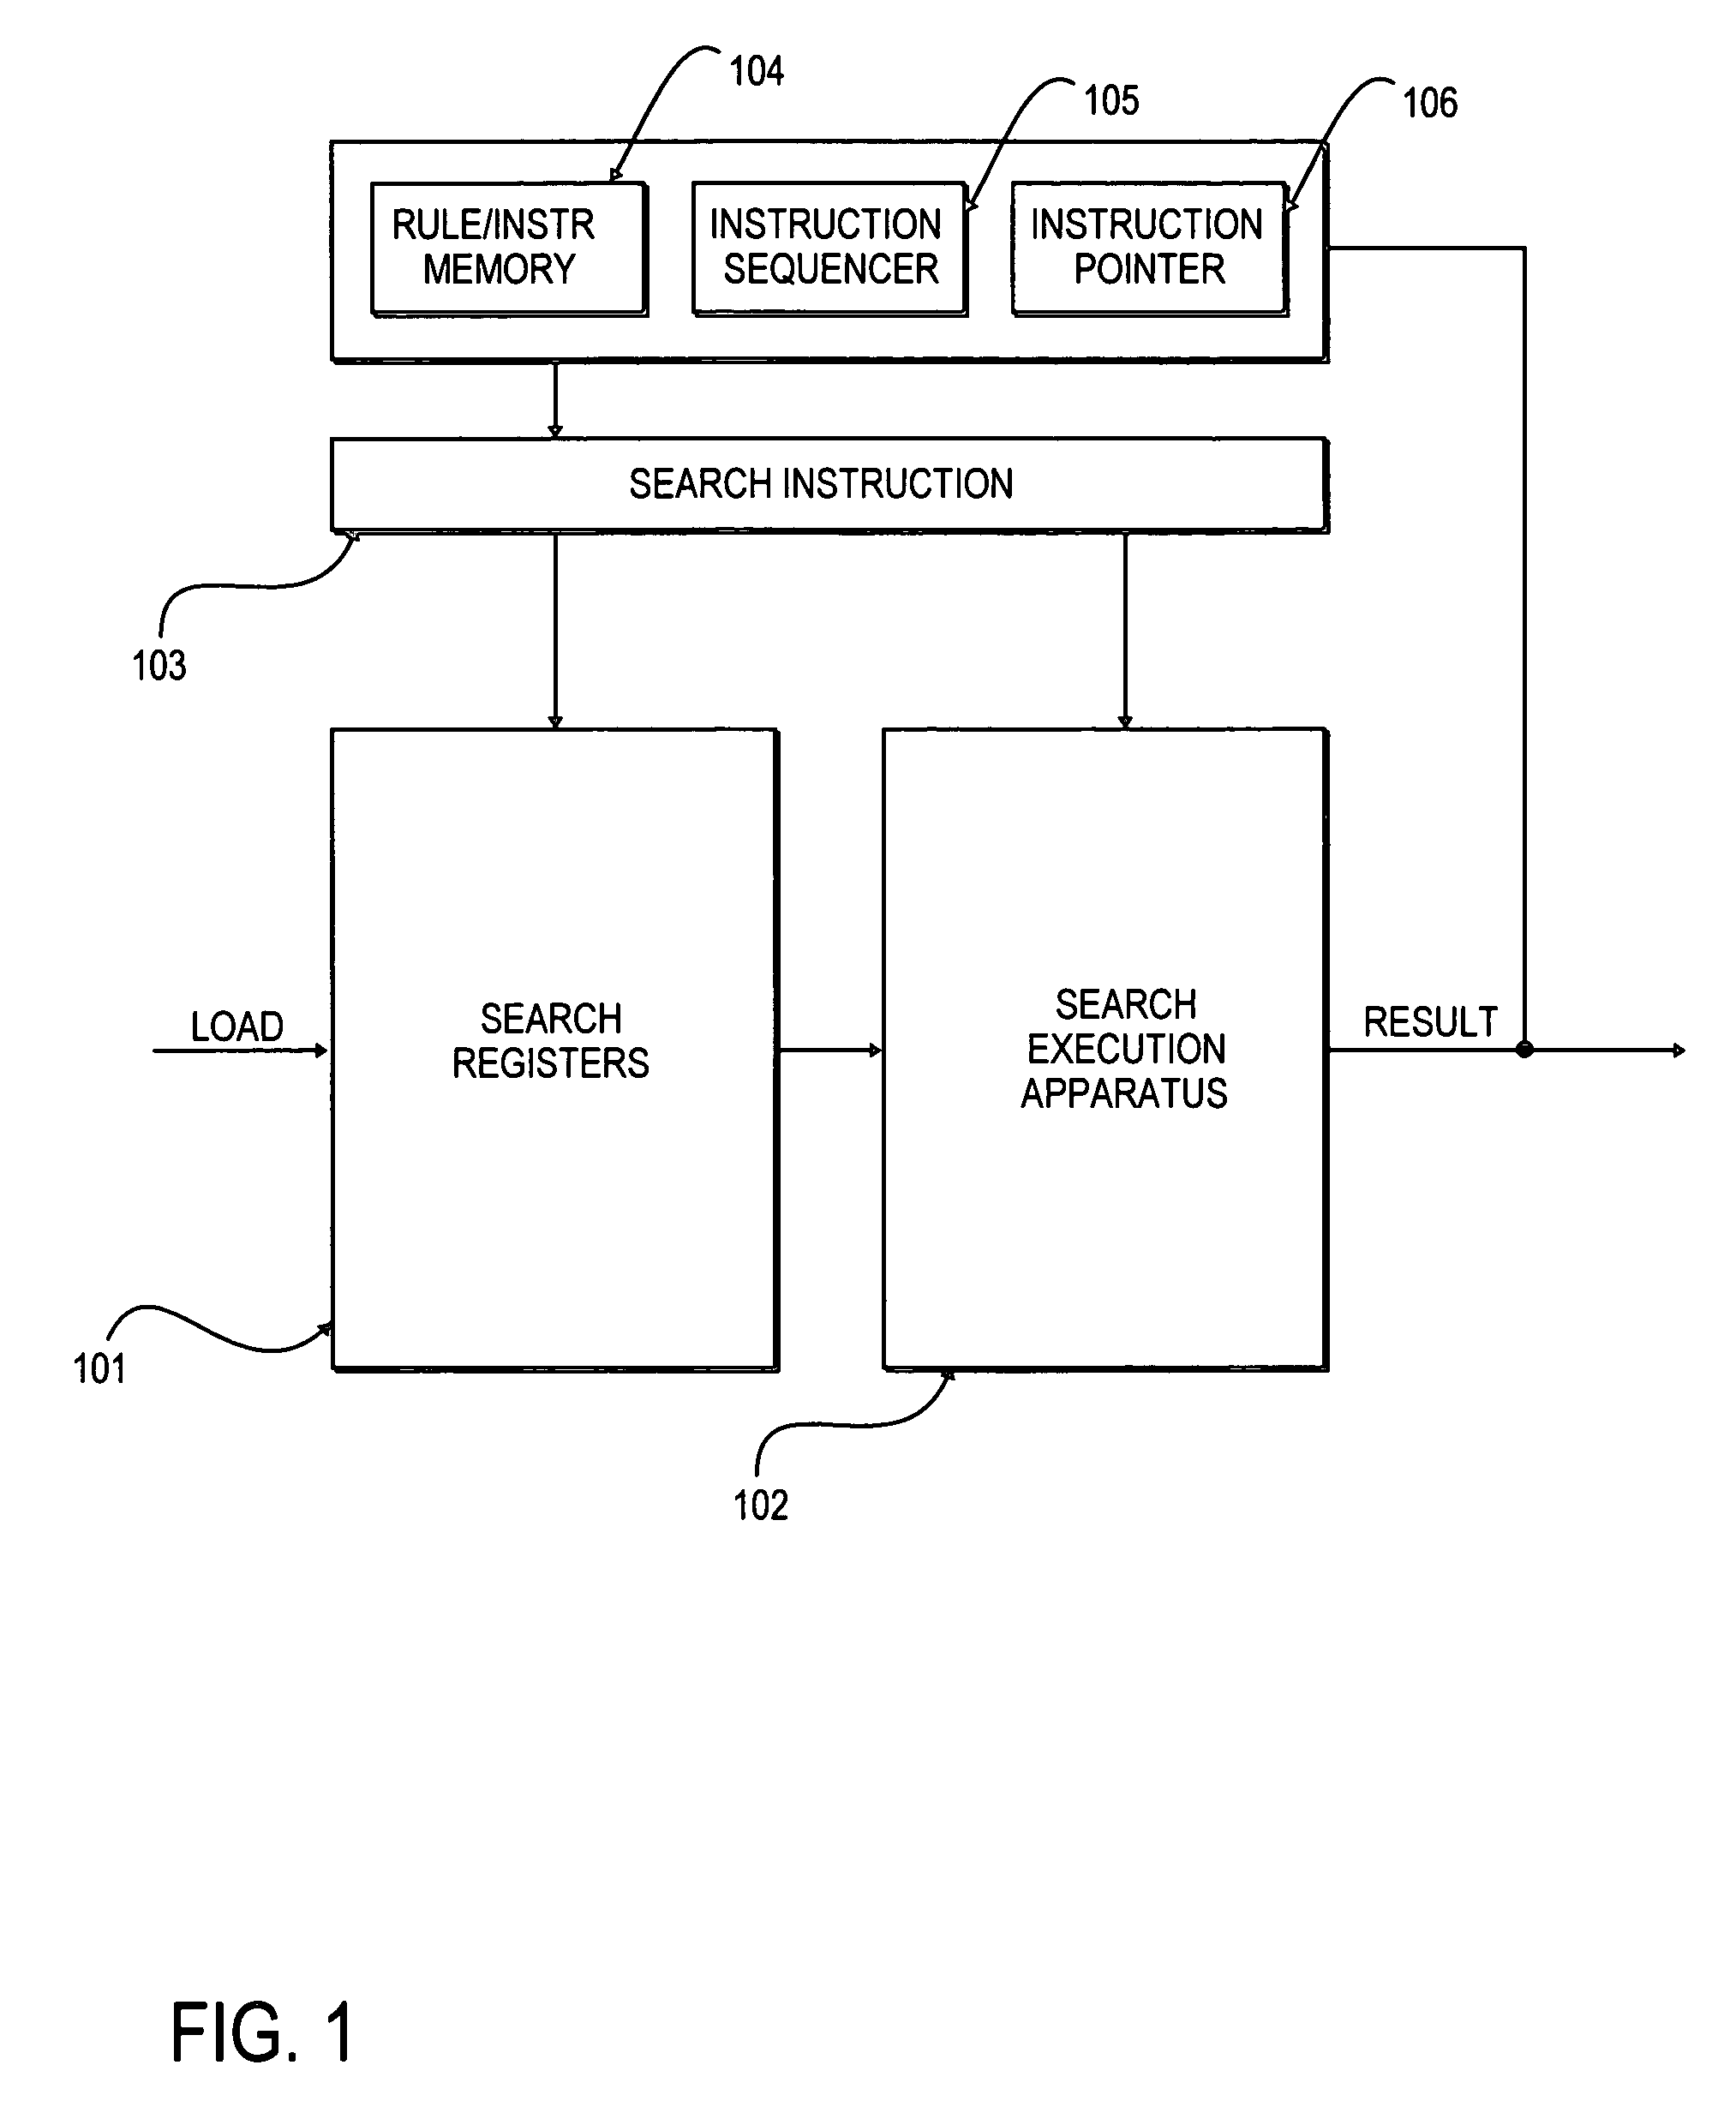 Programmable rule processing apparatus for conducting high speed contextual searches and characterizations of patterns in data